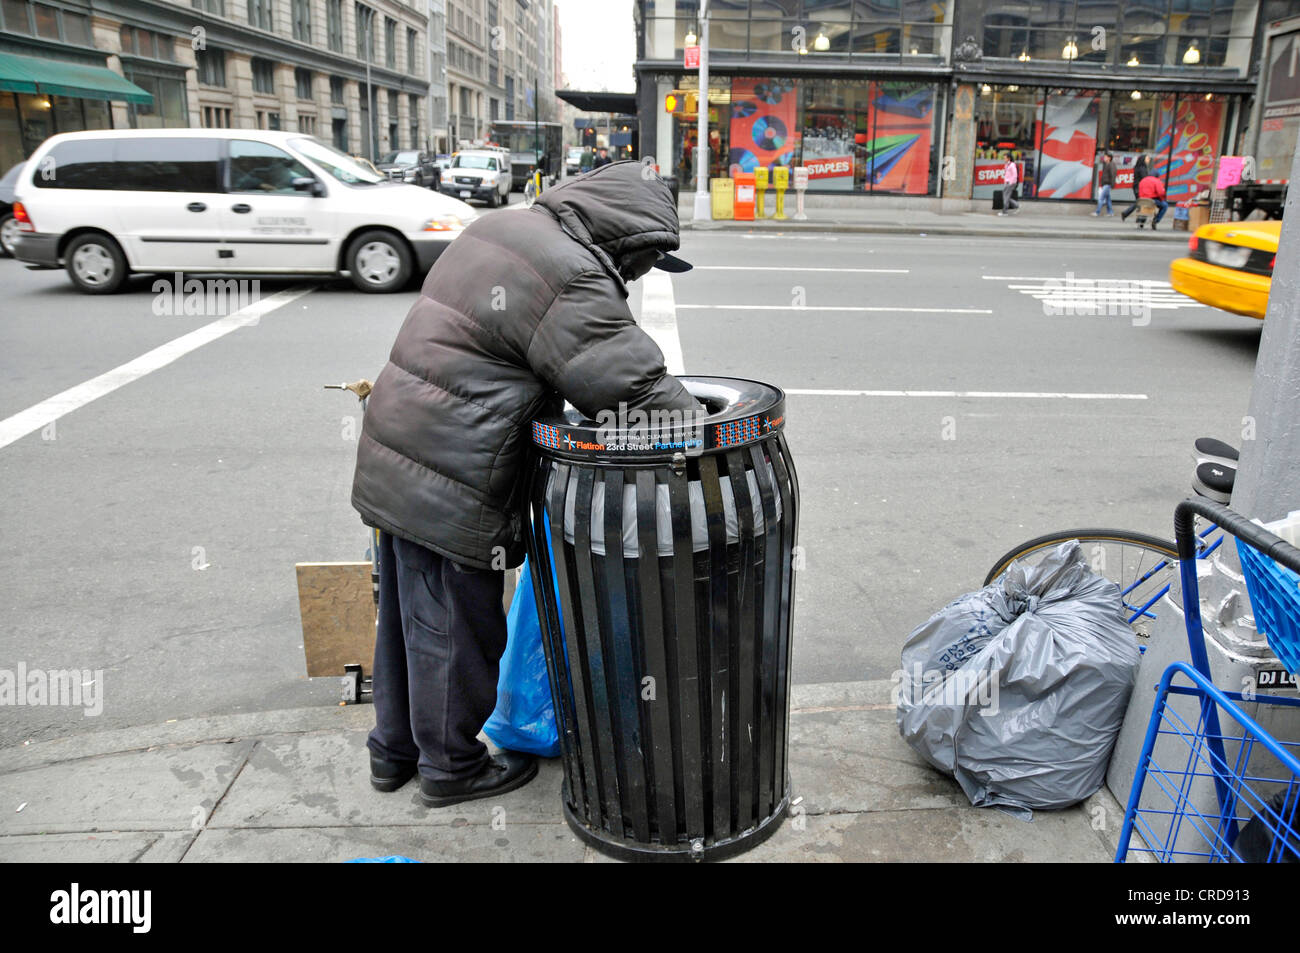 homeless-person-searching-in-a-dustbin-for-utilizable-things-usa-new-CRD913.jpg